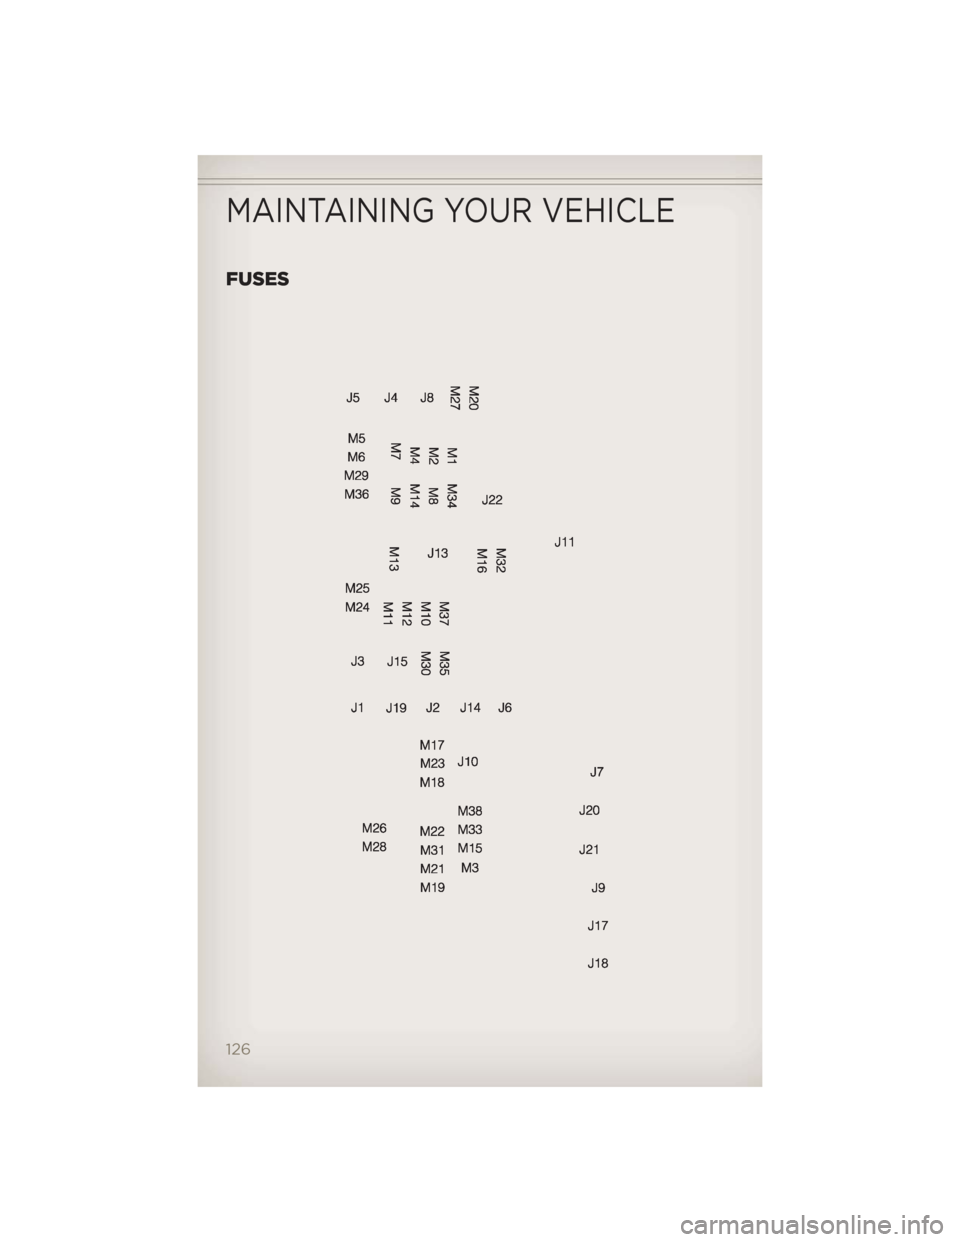 JEEP GRAND CHEROKEE 2012 WK2 / 4.G User Guide FUSES
MAINTAINING YOUR VEHICLE
126 